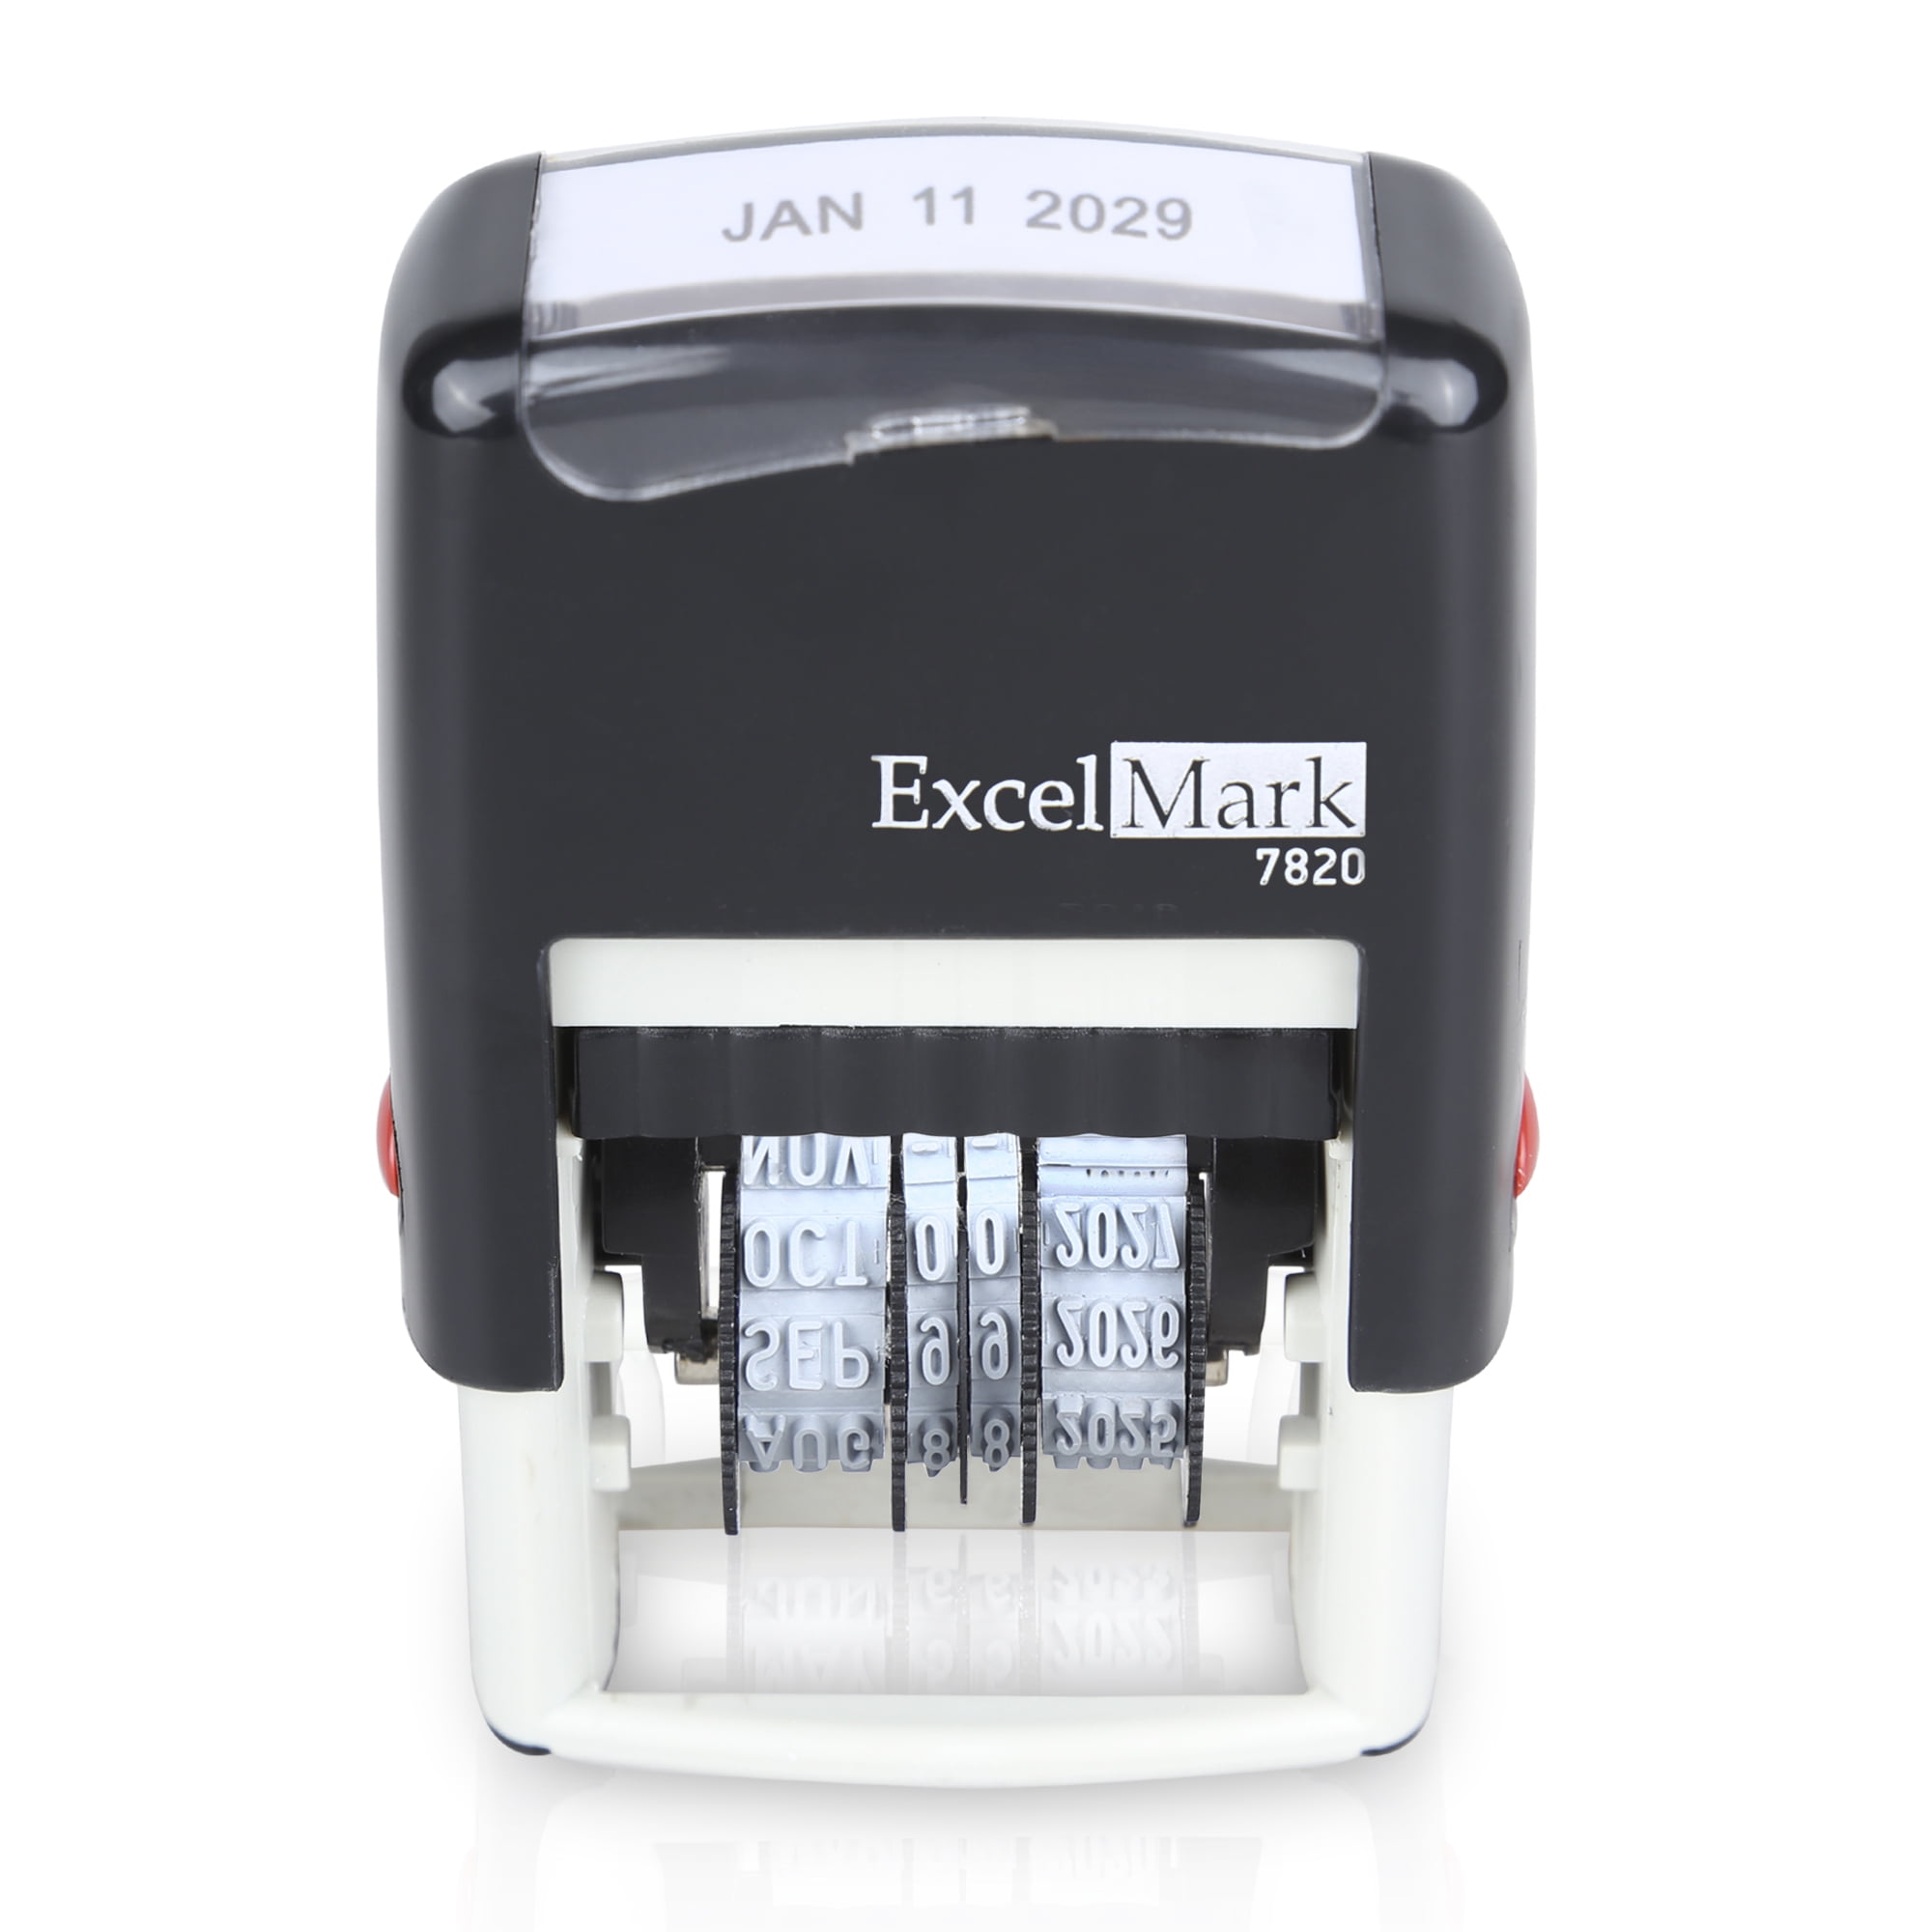 ExcelMark Self Inking Date Stamp S161Compact Size Black Ink DUE BY 